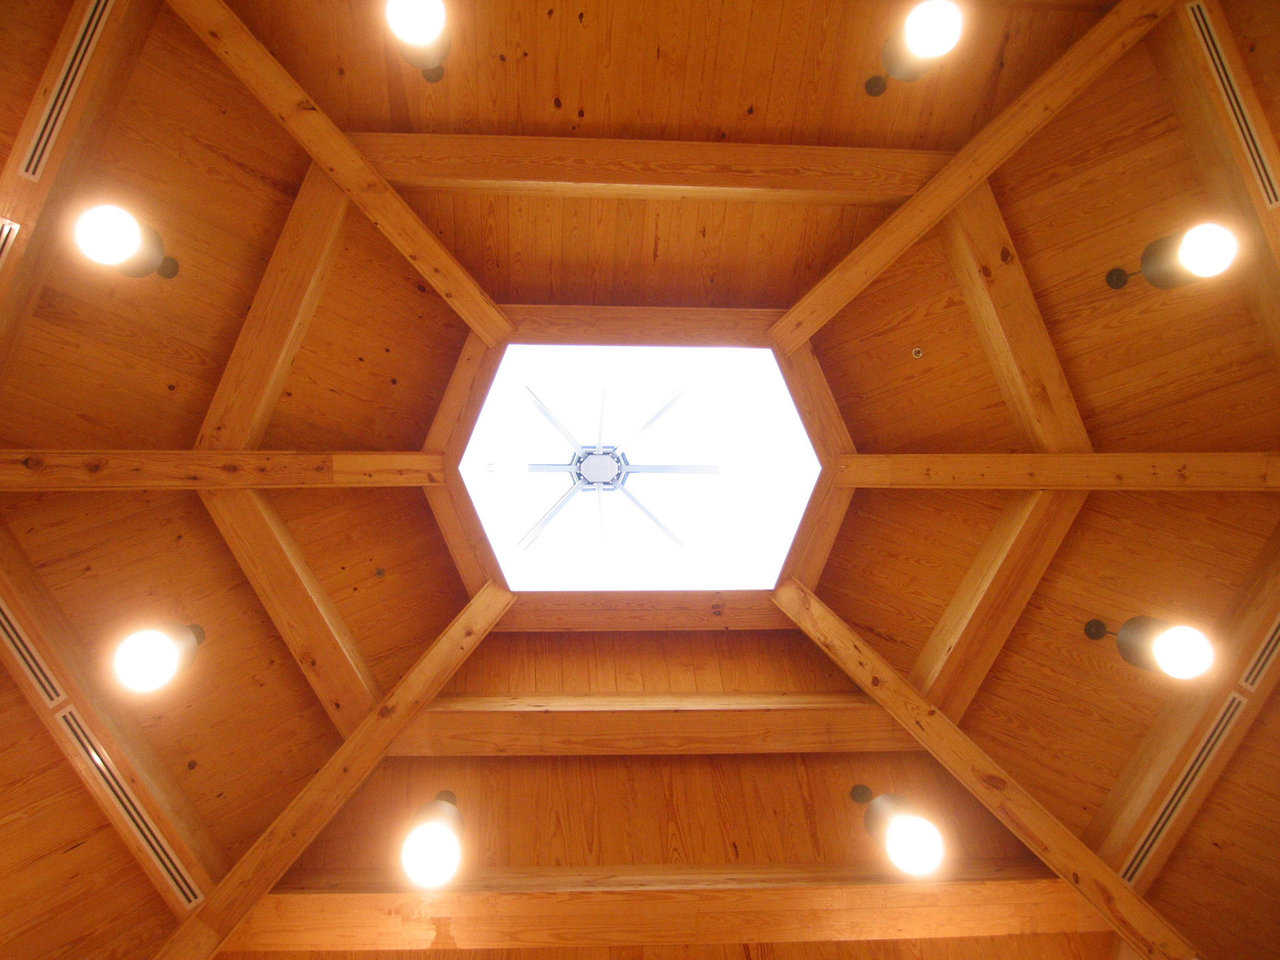 Skylight — It allows light to enter the chapel.